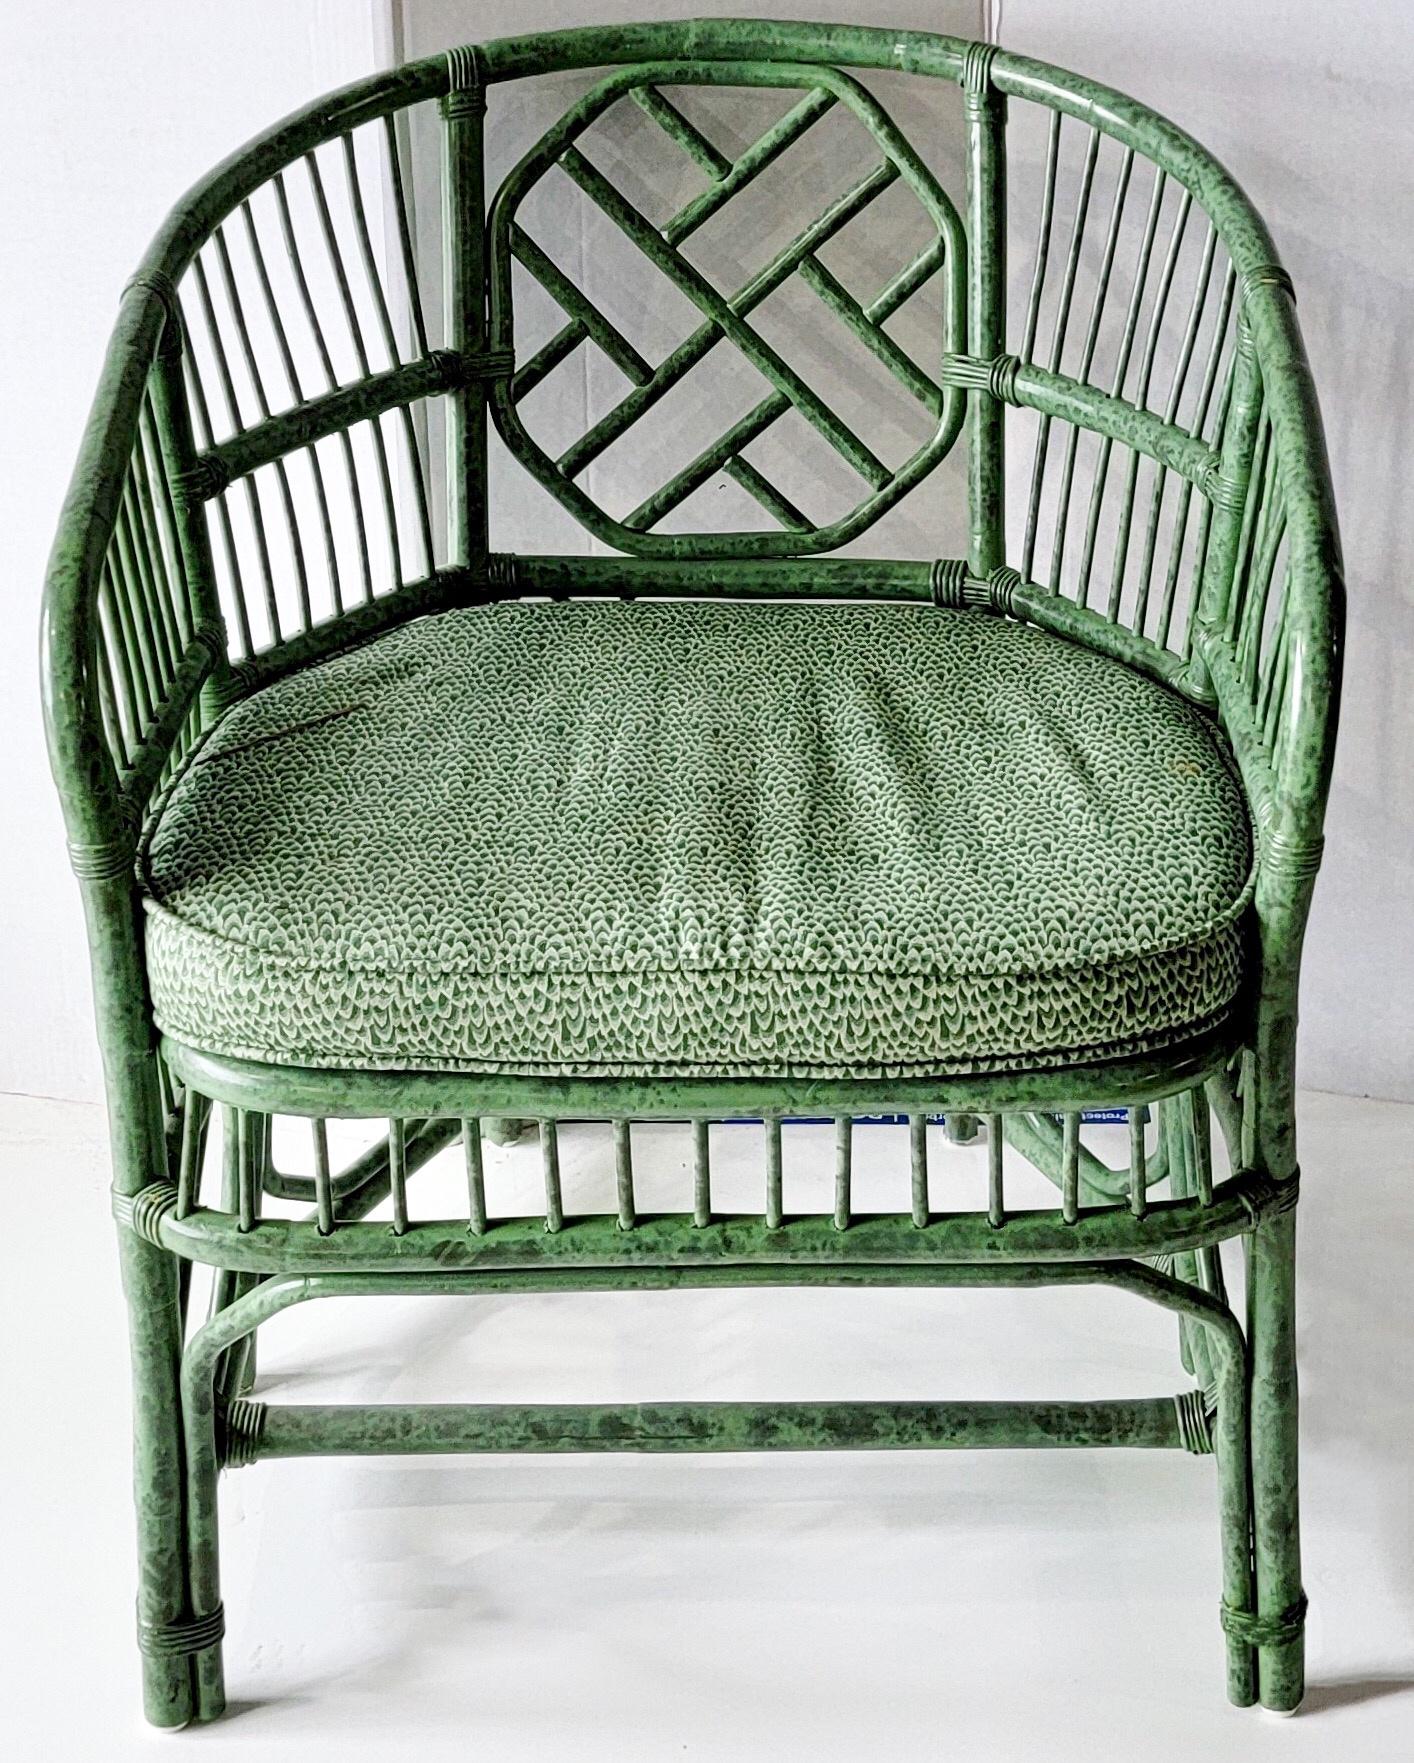 This is a fun chippendale style Brighton bamboo chair in vintage chintz fabric. The frame is a two toned green as is the cushion. It is unmarked.